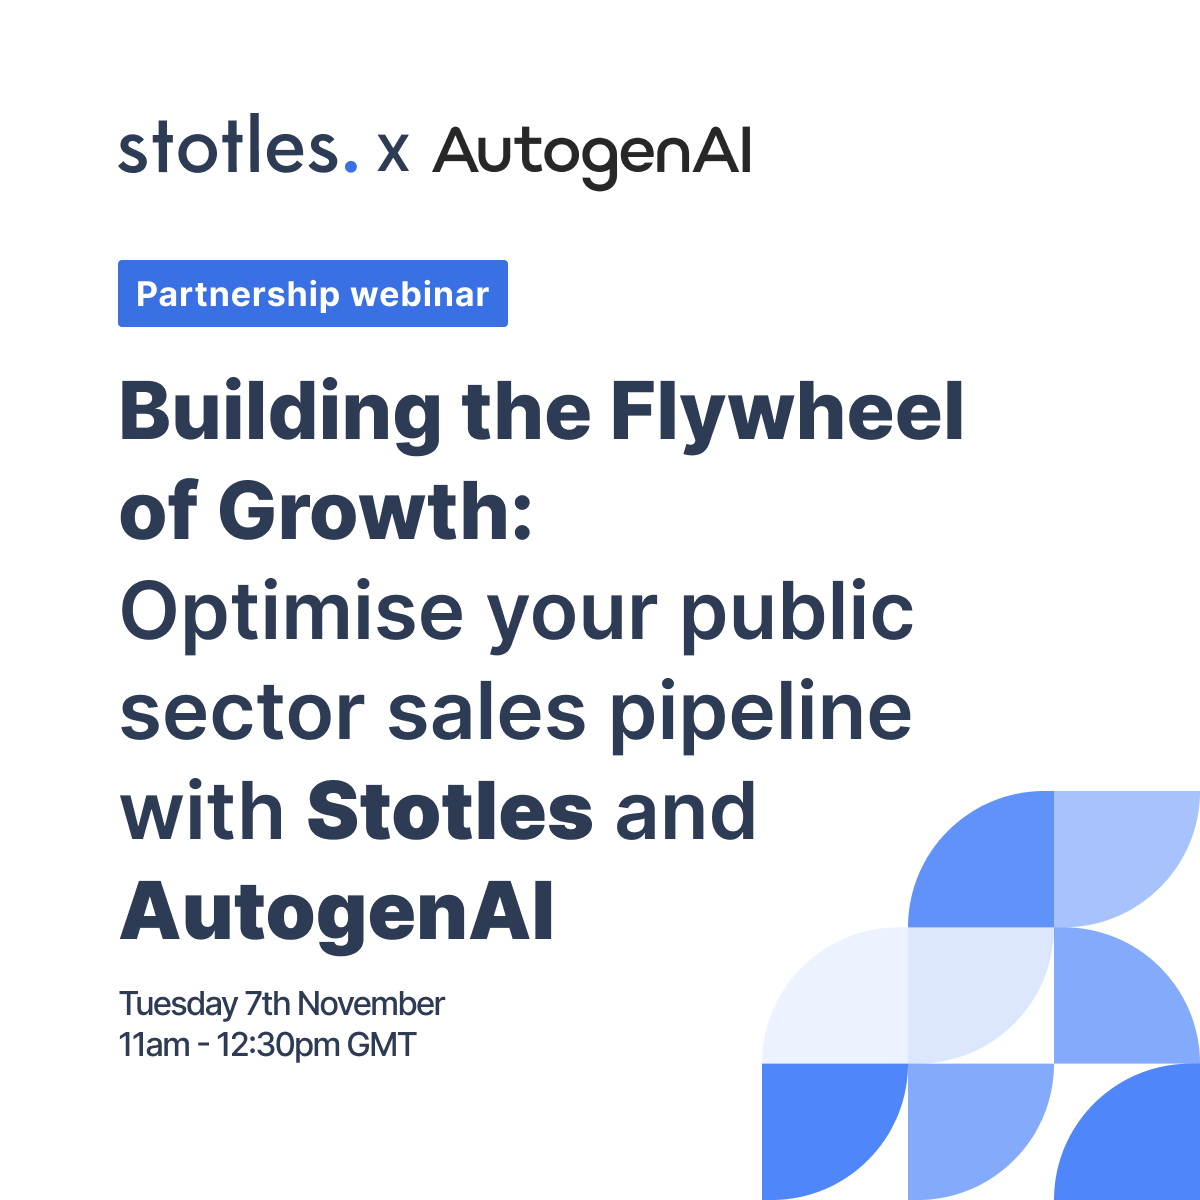 Upcoming webinar: Optimise your public sector sales pipeline with Stotles and AutogenAI